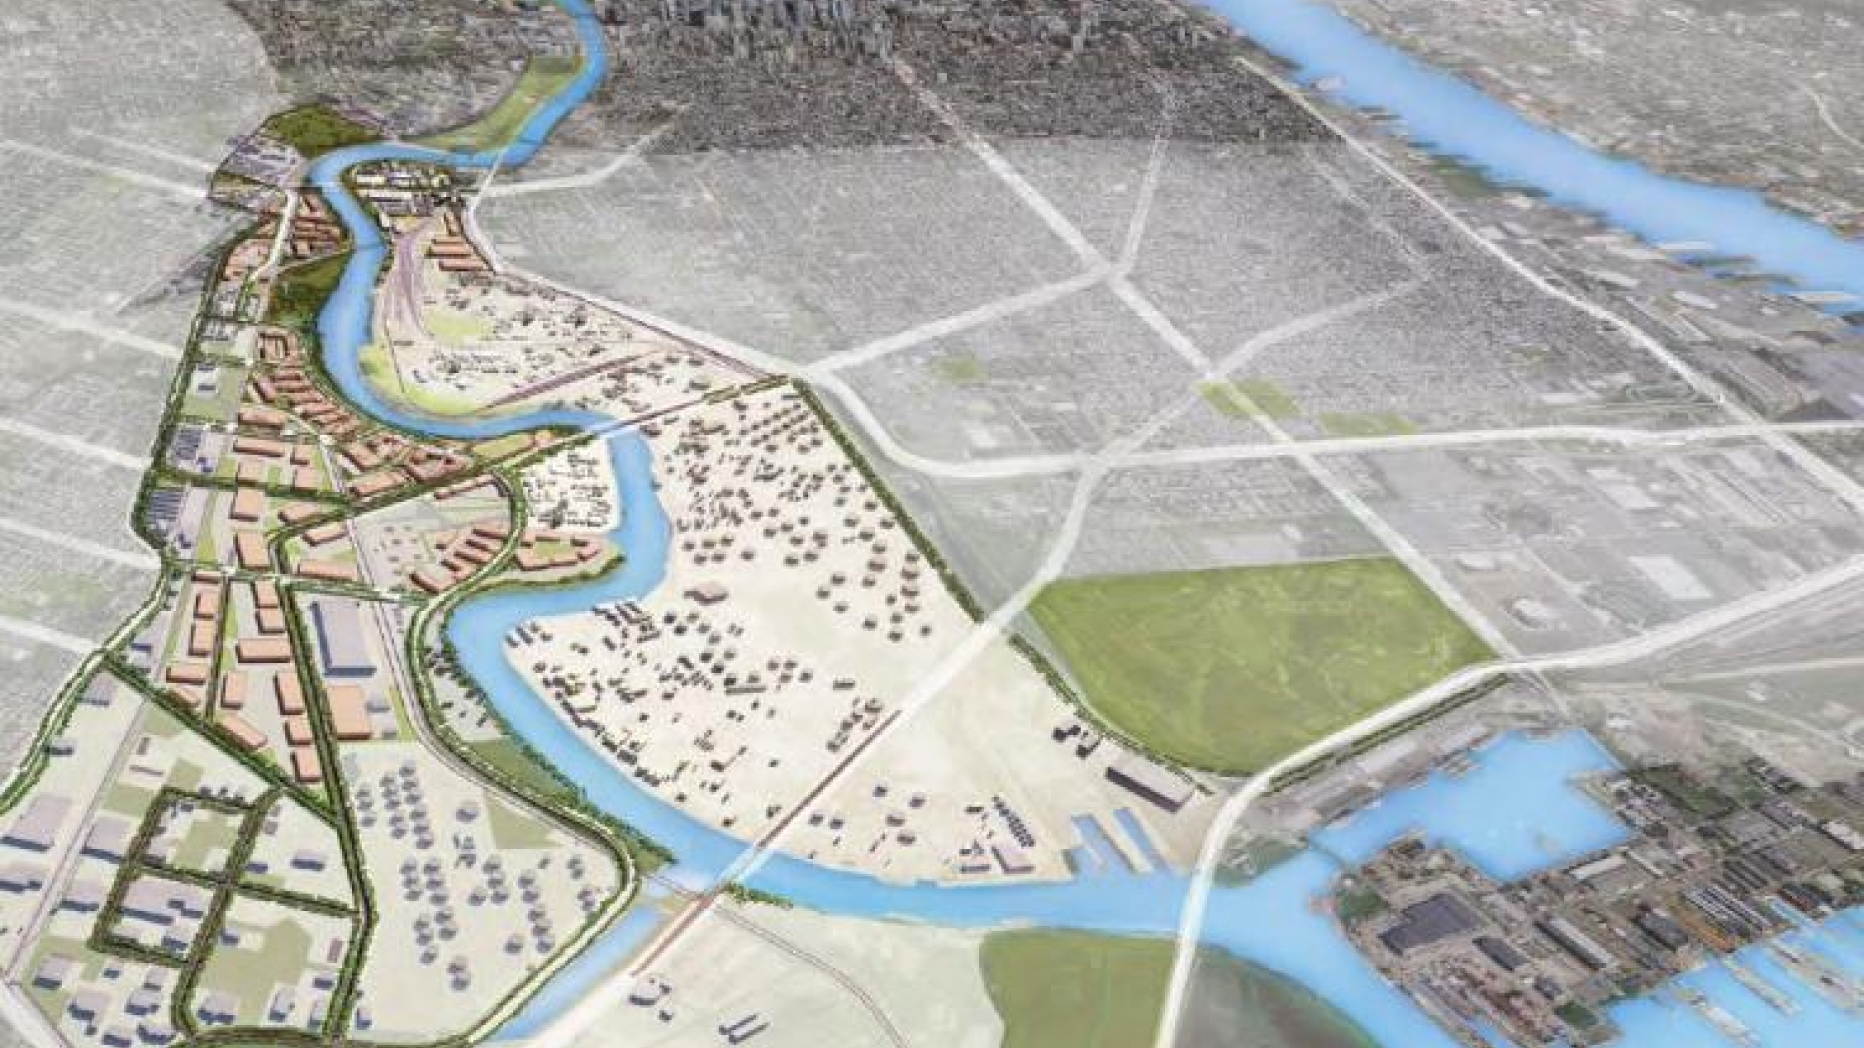 3D model of the Lower Schuylkill area.